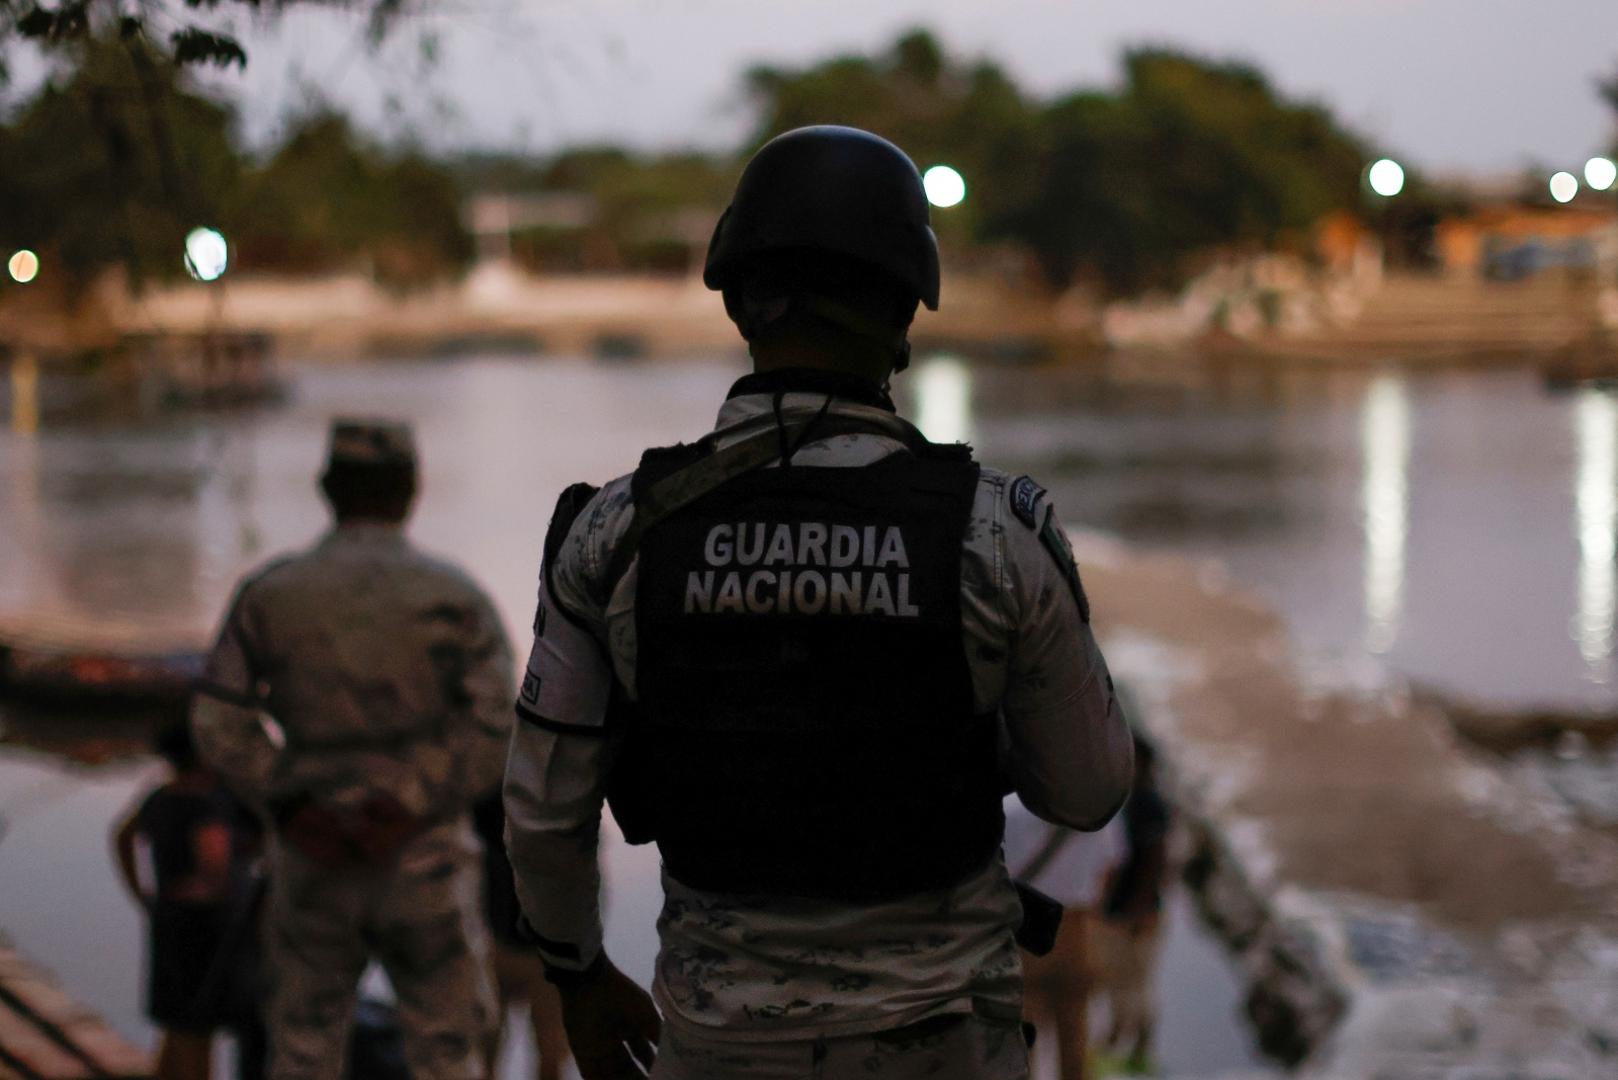 Members of the National Guard keep watch at the banks of the Suchiate river, while they guard the border to prevent a migrant caravan of Central Americans from entering, in Ciudad Hidalgo Members of the National Guard keep watch at the banks of the Suchiate river, the natural border between Mexico and Guatemala, while they guard the border to prevent a migrant caravan of Central Americans from entering, in Ciudad Hidalgo, Mexico January 17, 2021. REUTERS/Carlos Jasso CARLOS JASSO